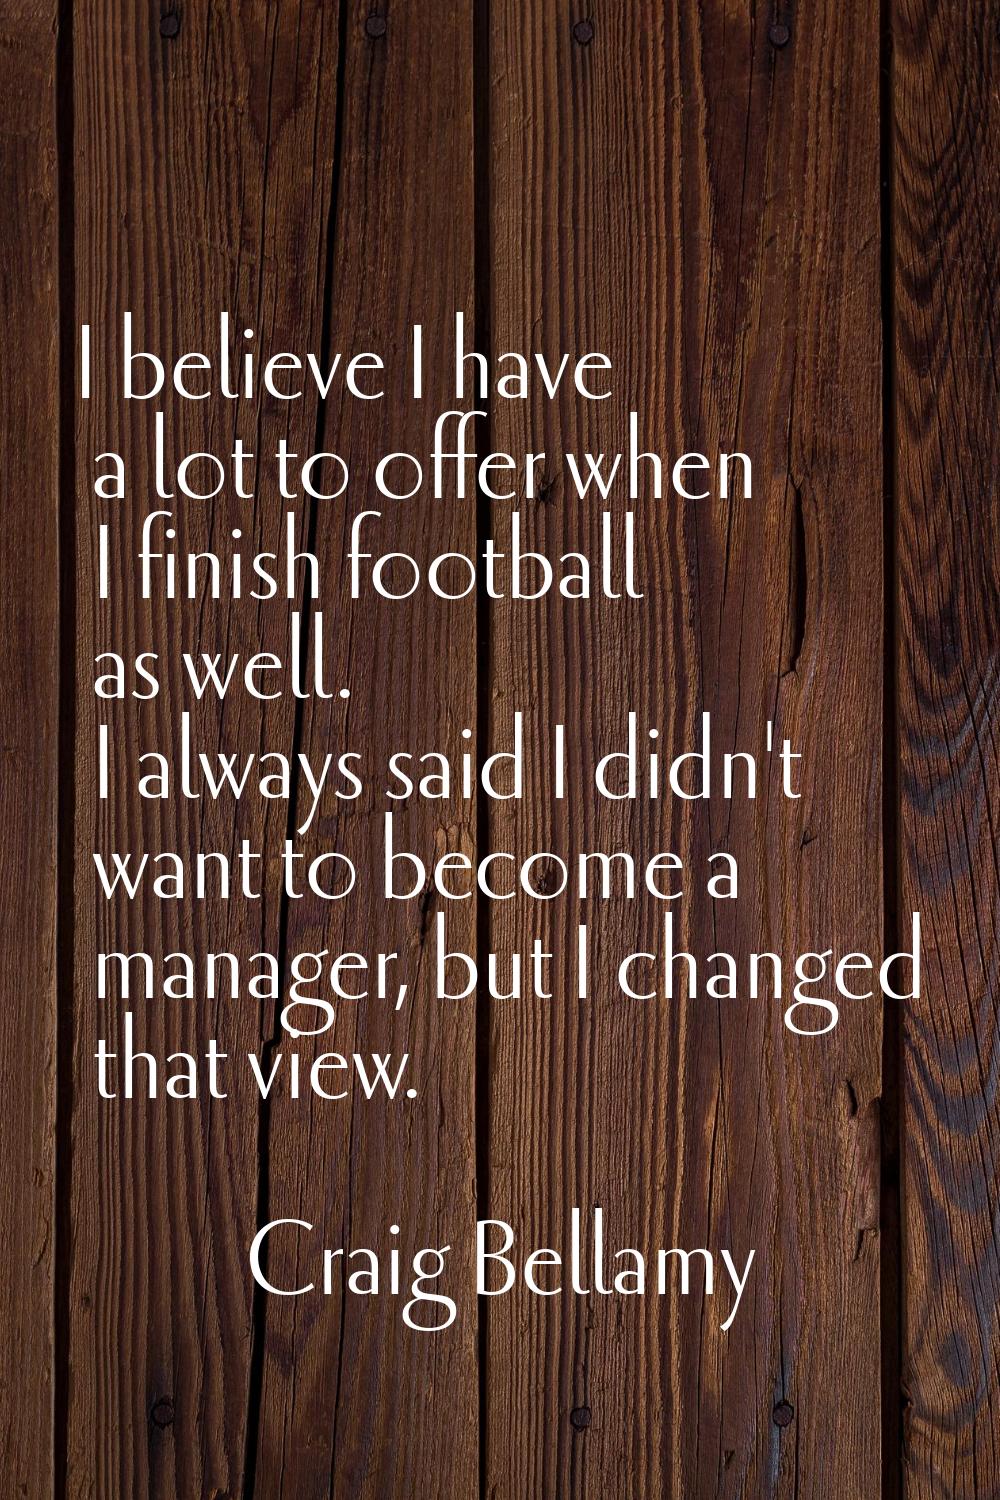 I believe I have a lot to offer when I finish football as well. I always said I didn't want to beco